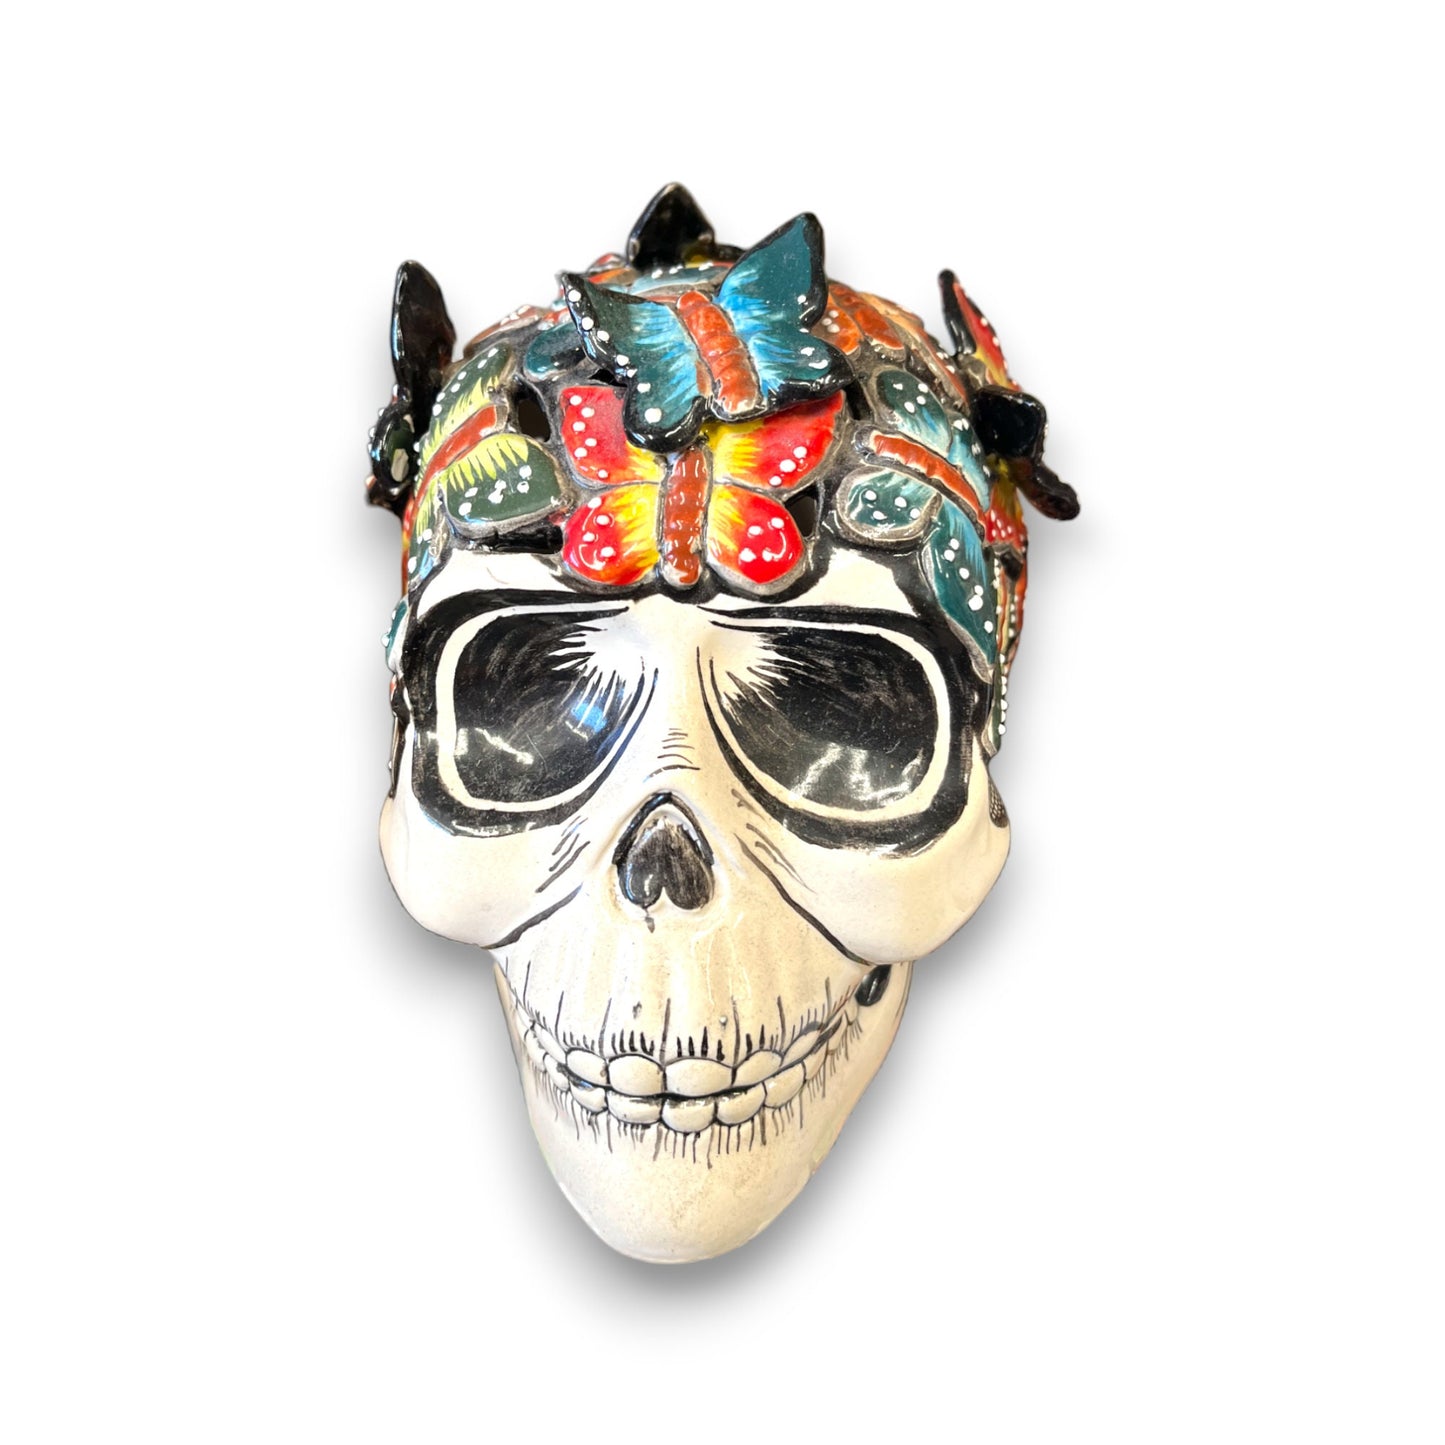 Mexican Handmade Skull Statue | Intriguing and Spooky Home Decor